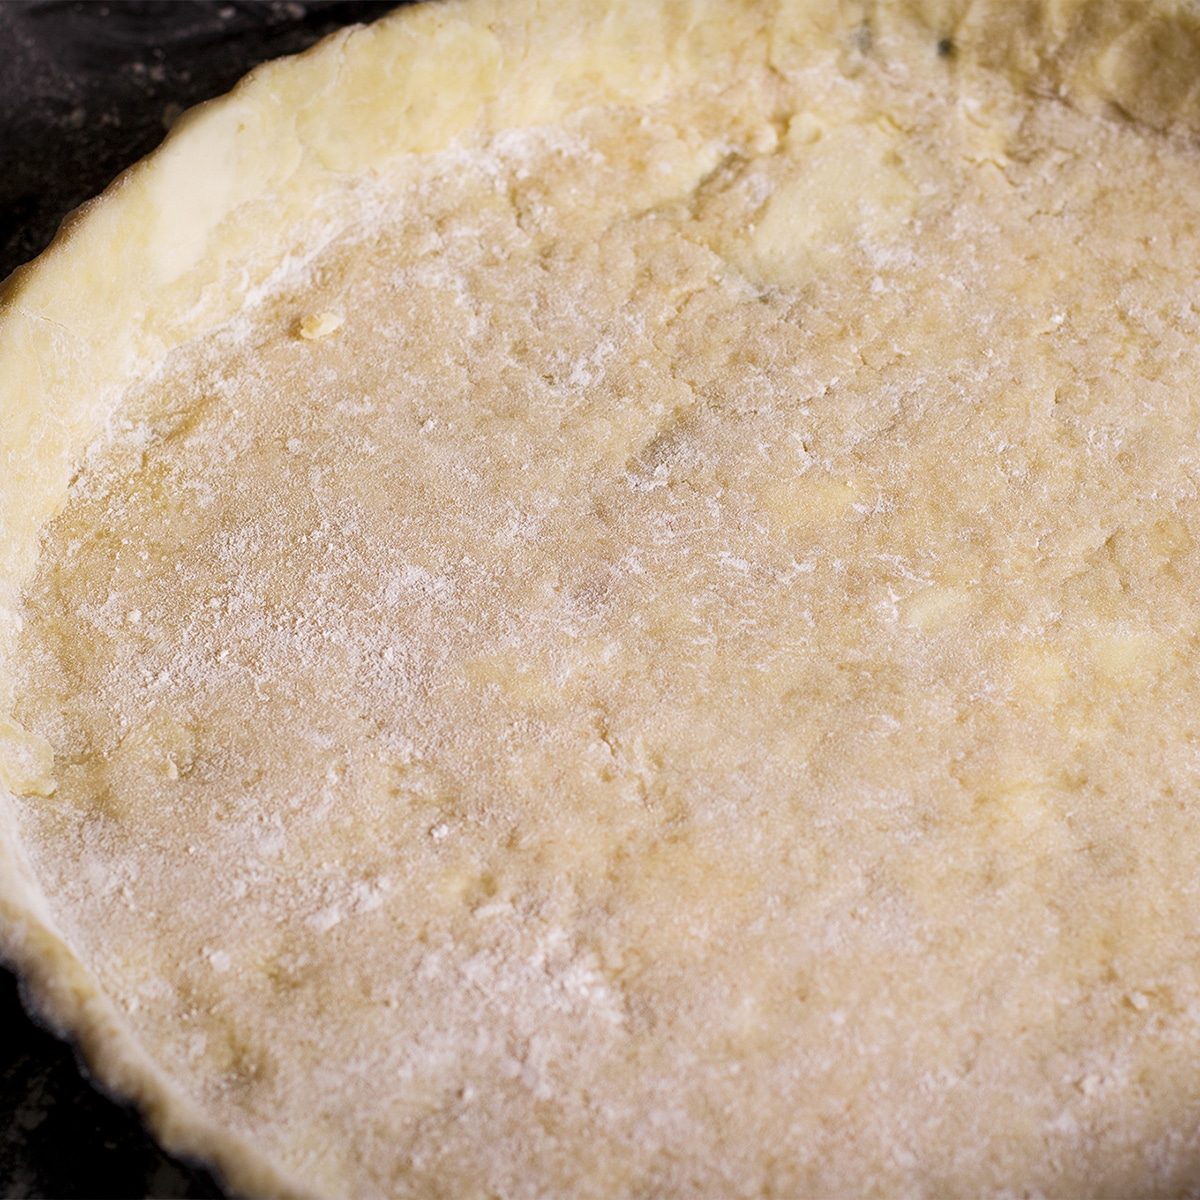 A tart pan that's been fitted with tart pastry dough.